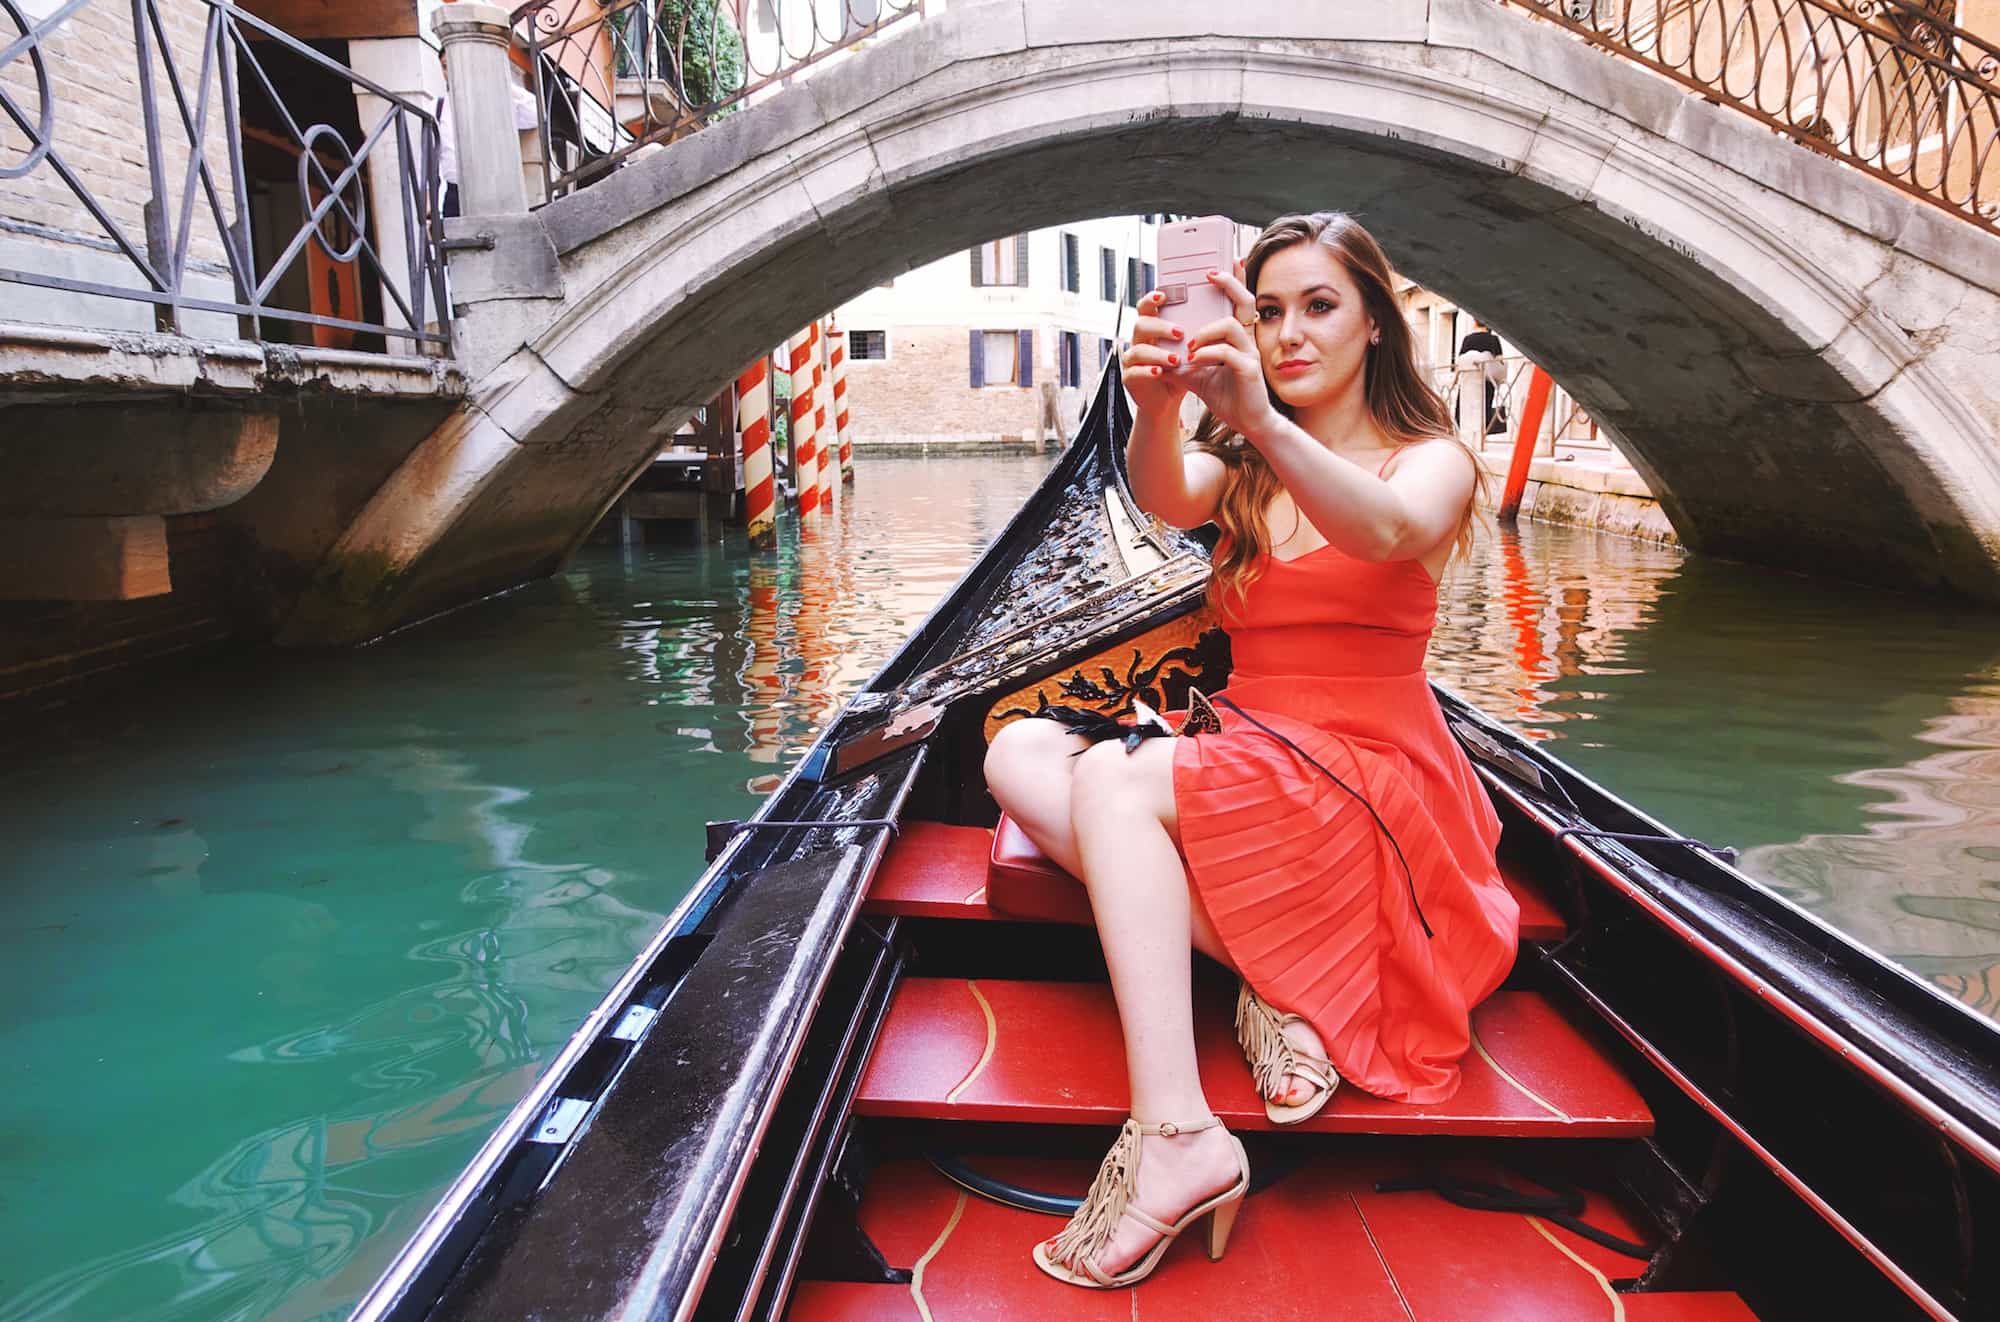 instagrammable places in venice